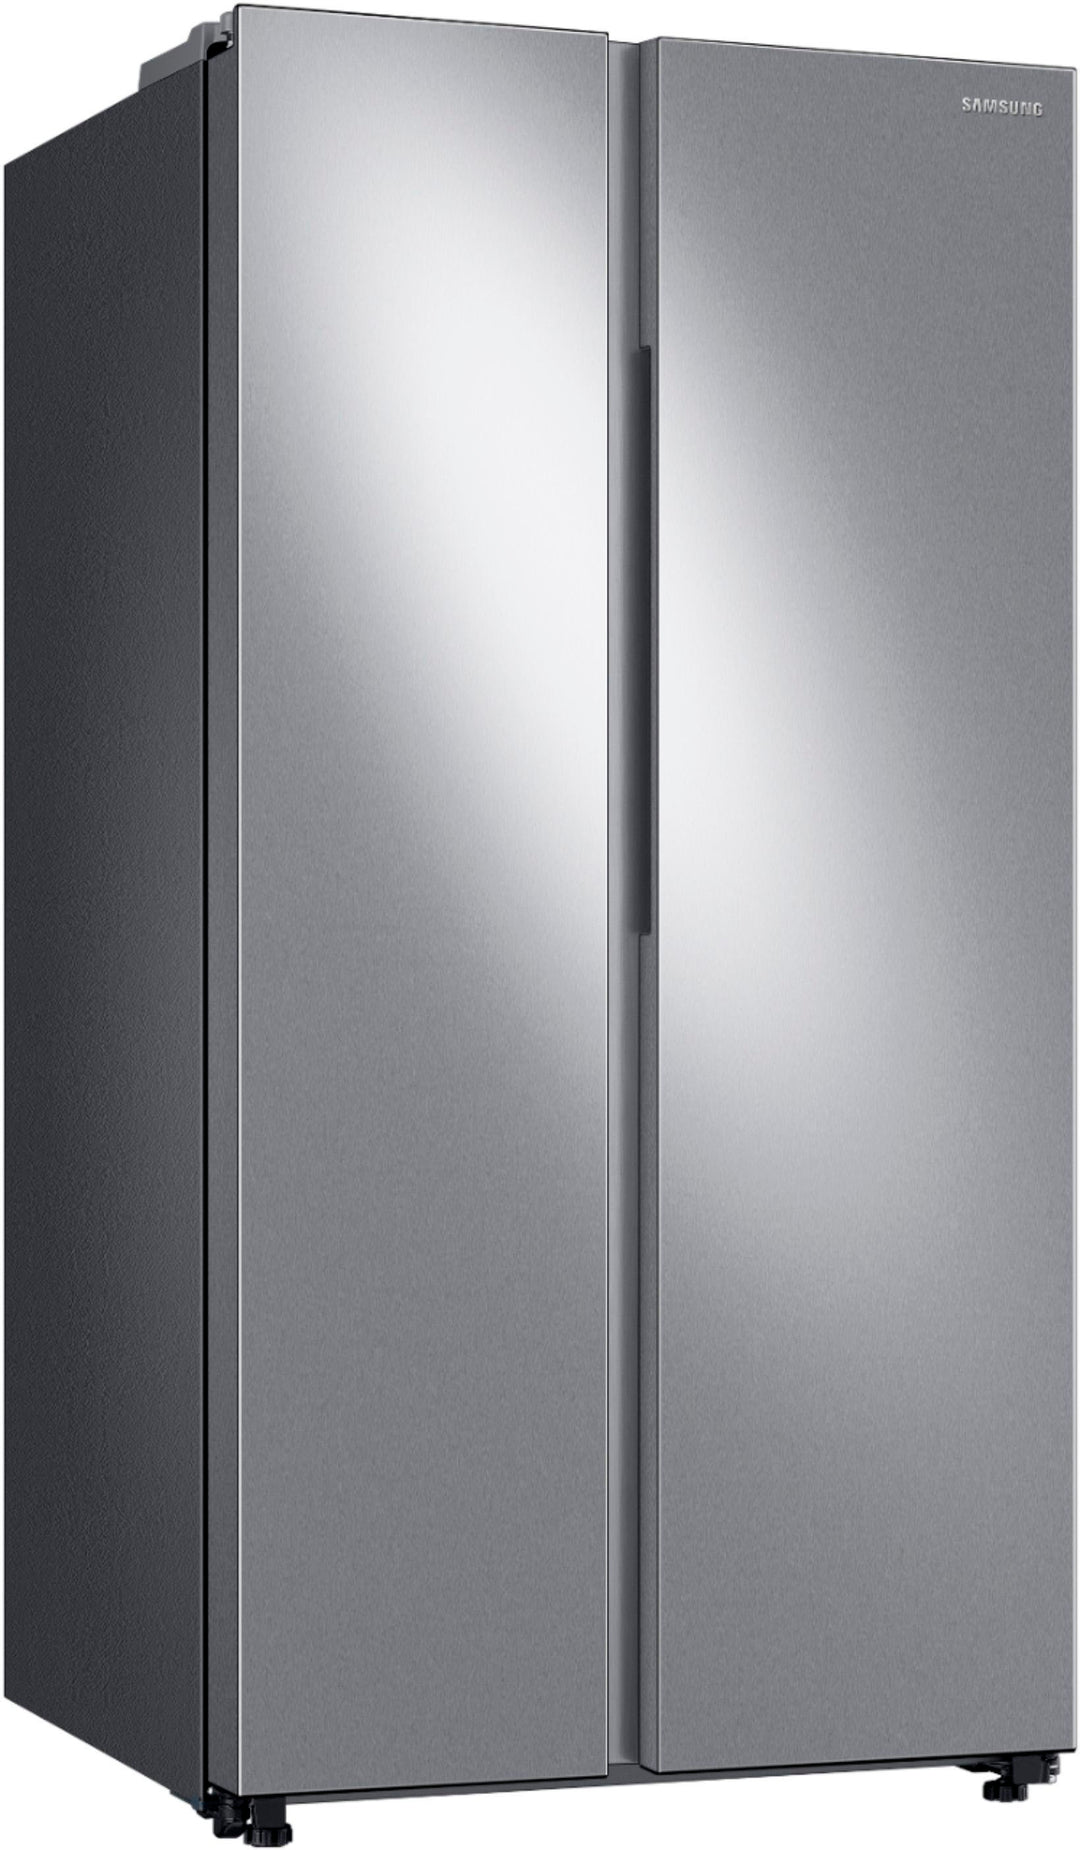 Samsung - OBX 28 cu. ft. Side-by-Side Refrigerator with WiFi and Large Capacity - Stainless Steel_5